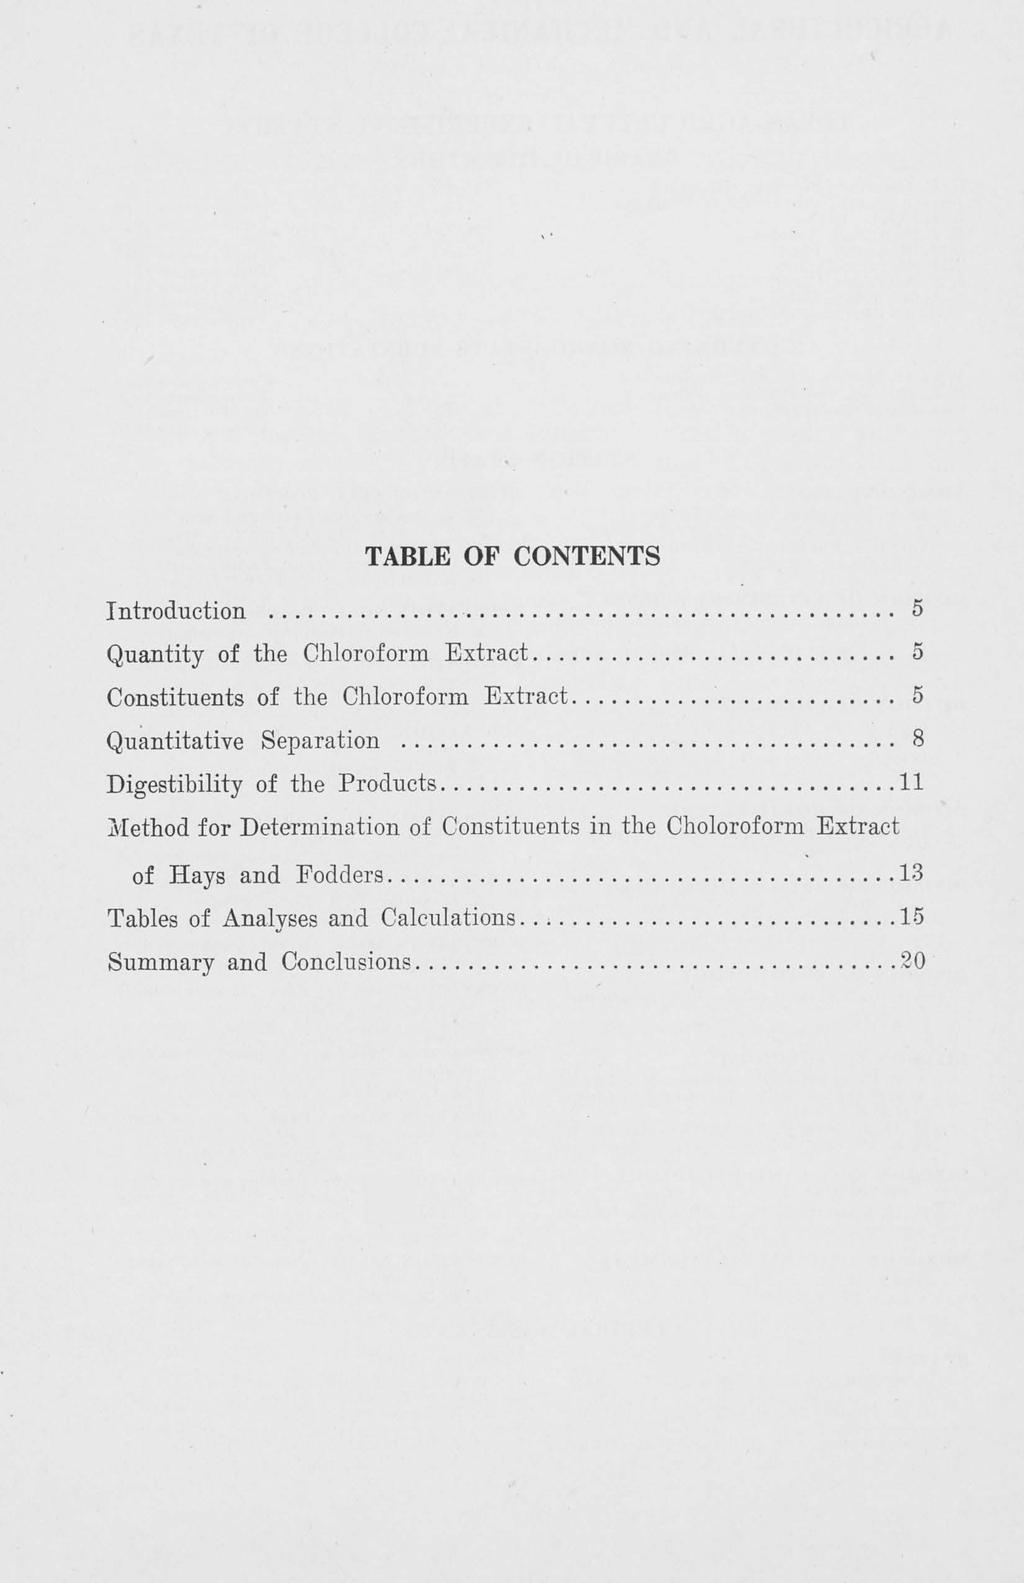 TABLE OF CONTENTS Introduction... 5 Quantity of the Chloroform Extract... 5 Constituents of the Chloroform Extract... 5 Quantitative Separation.